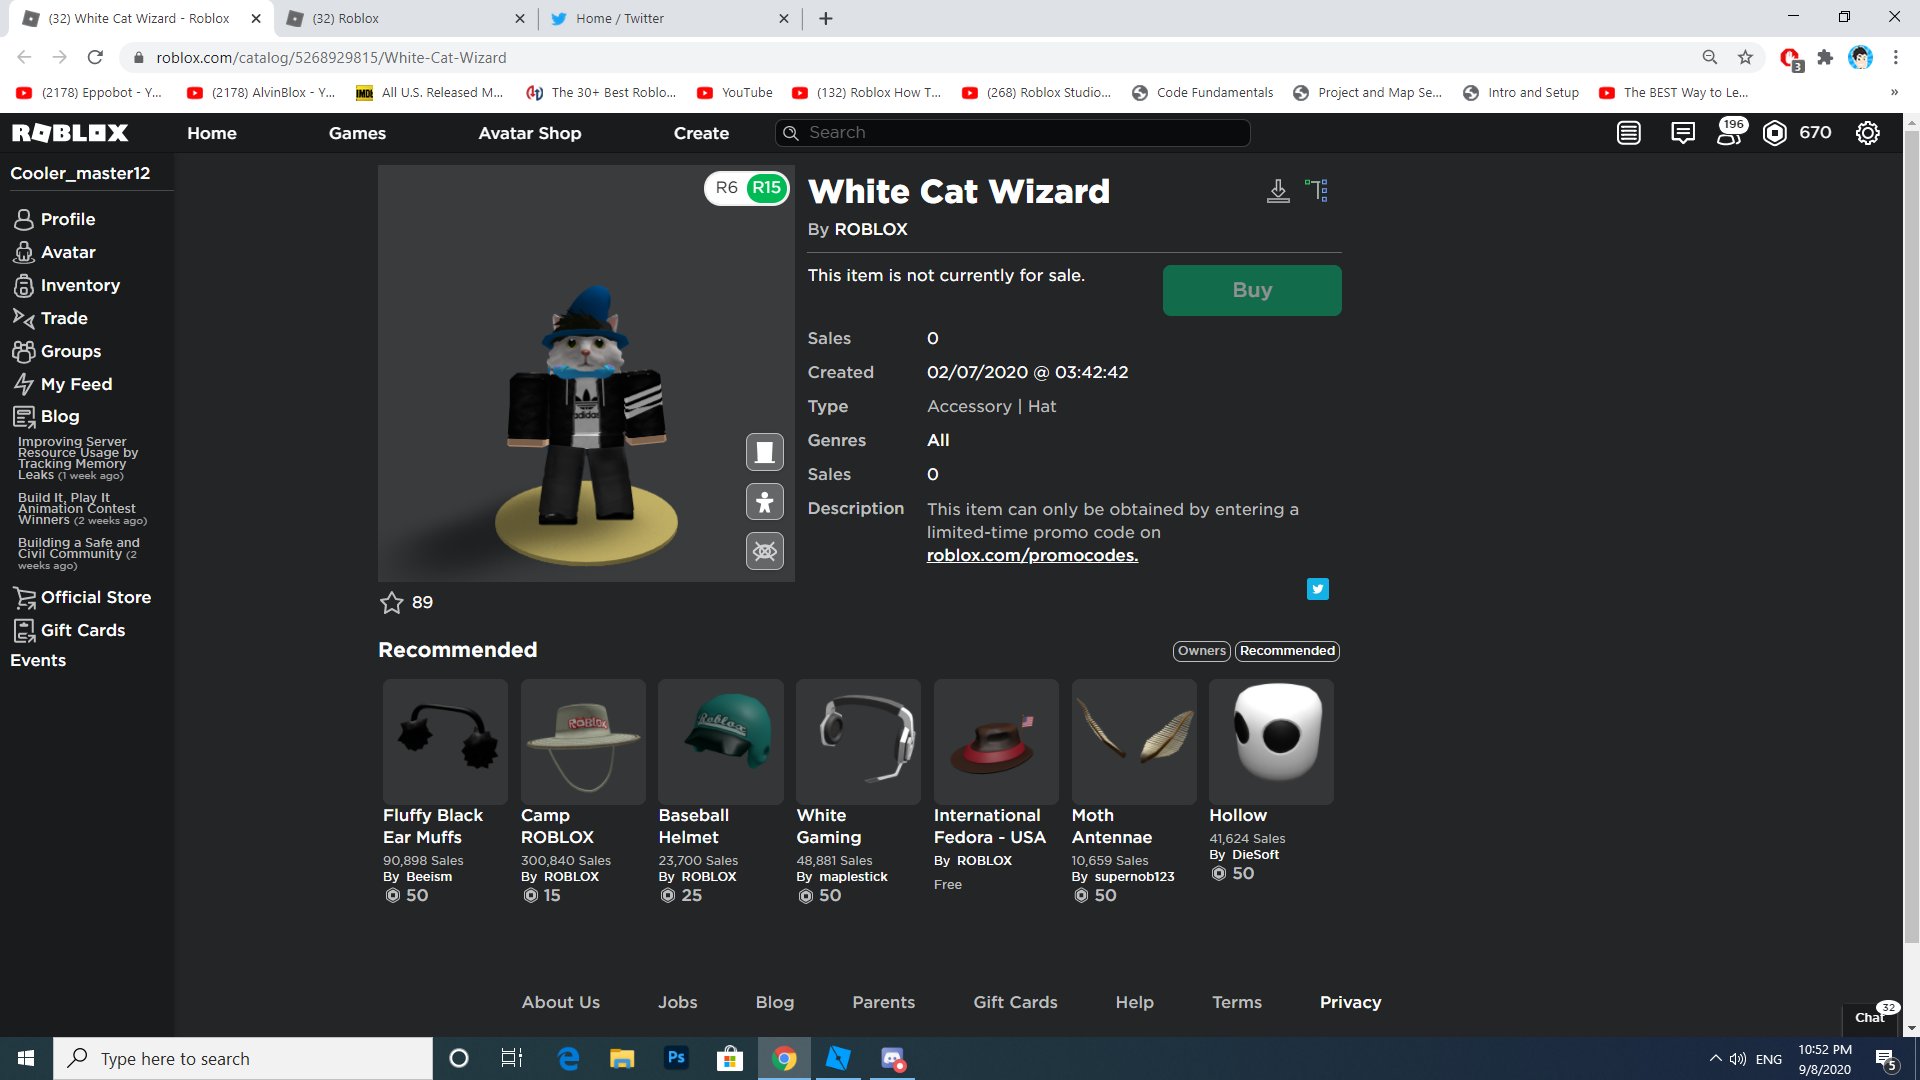 Choco Stick On Twitter Hi Quys Roblox Guys Released A New Promocode Item Pls Like And Retweet This Roblox Roblox Robloxdev Robloxdev - white wizard cat roblox promo code